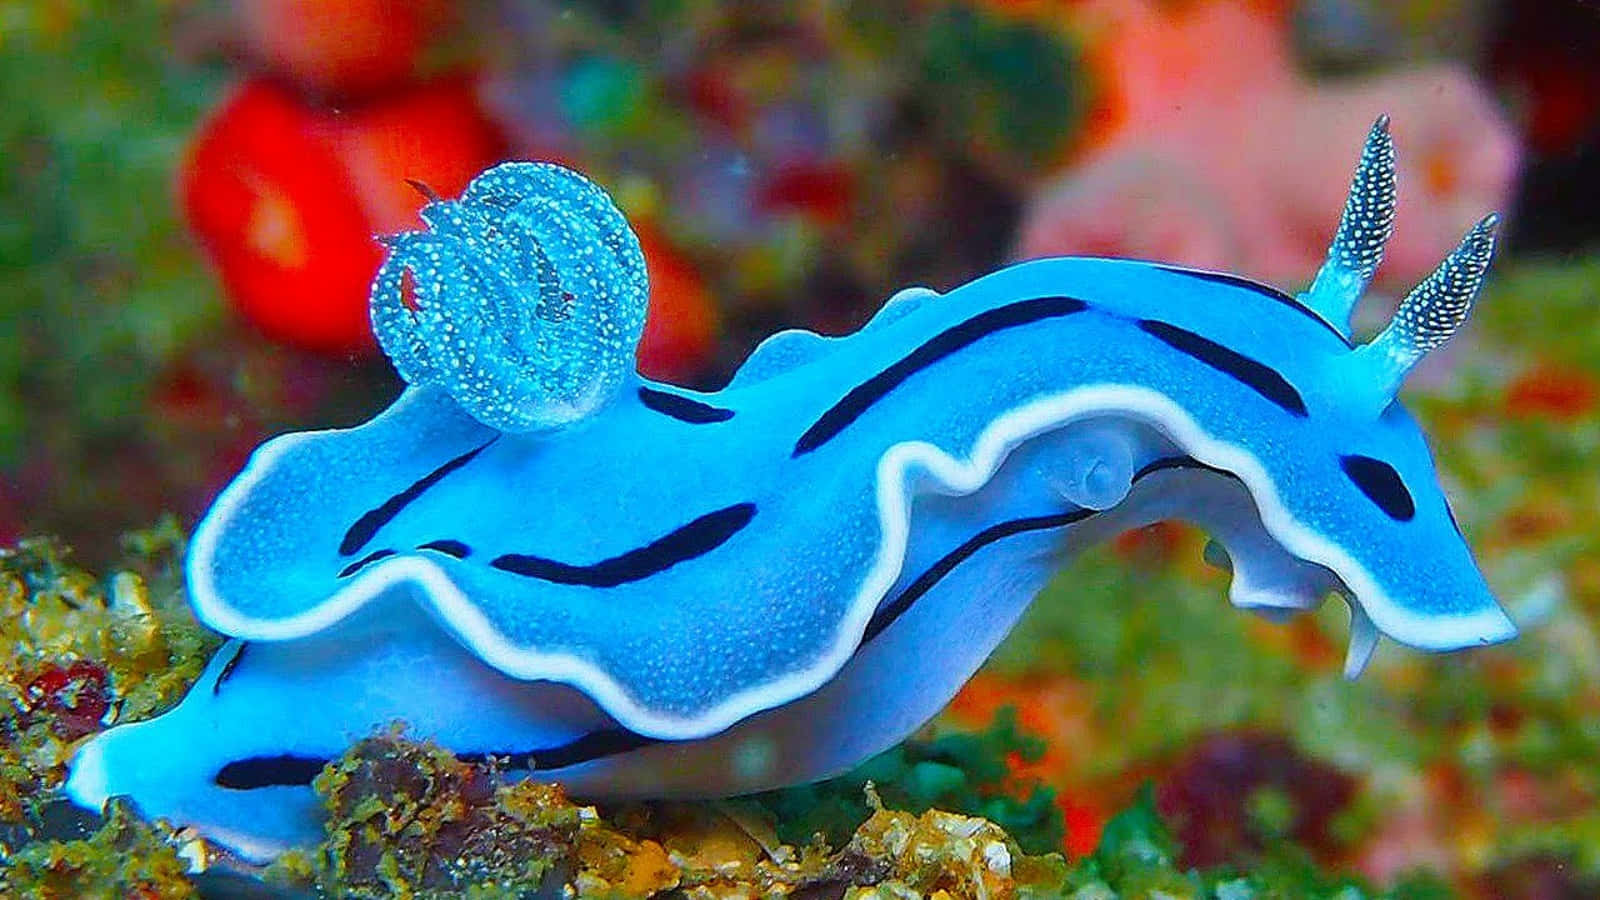 A colorful sea creature swimming through the ocean